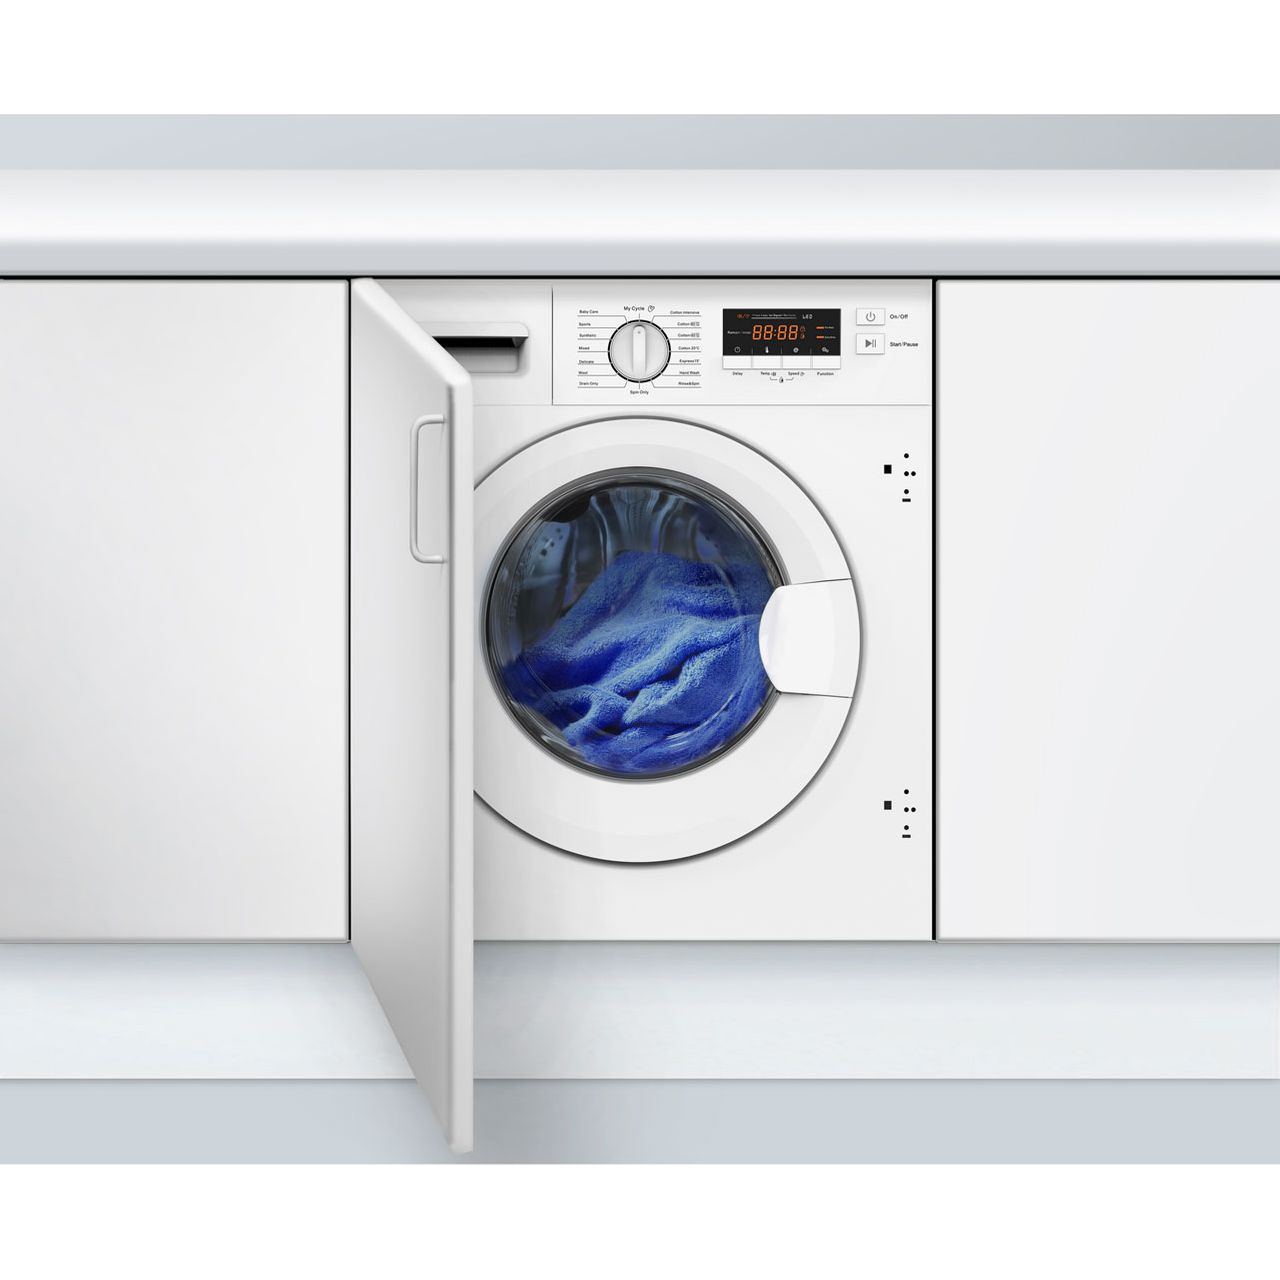 Stoves INTWM7KG Integrated 7Kg Washing Machine with 1400 rpm Review